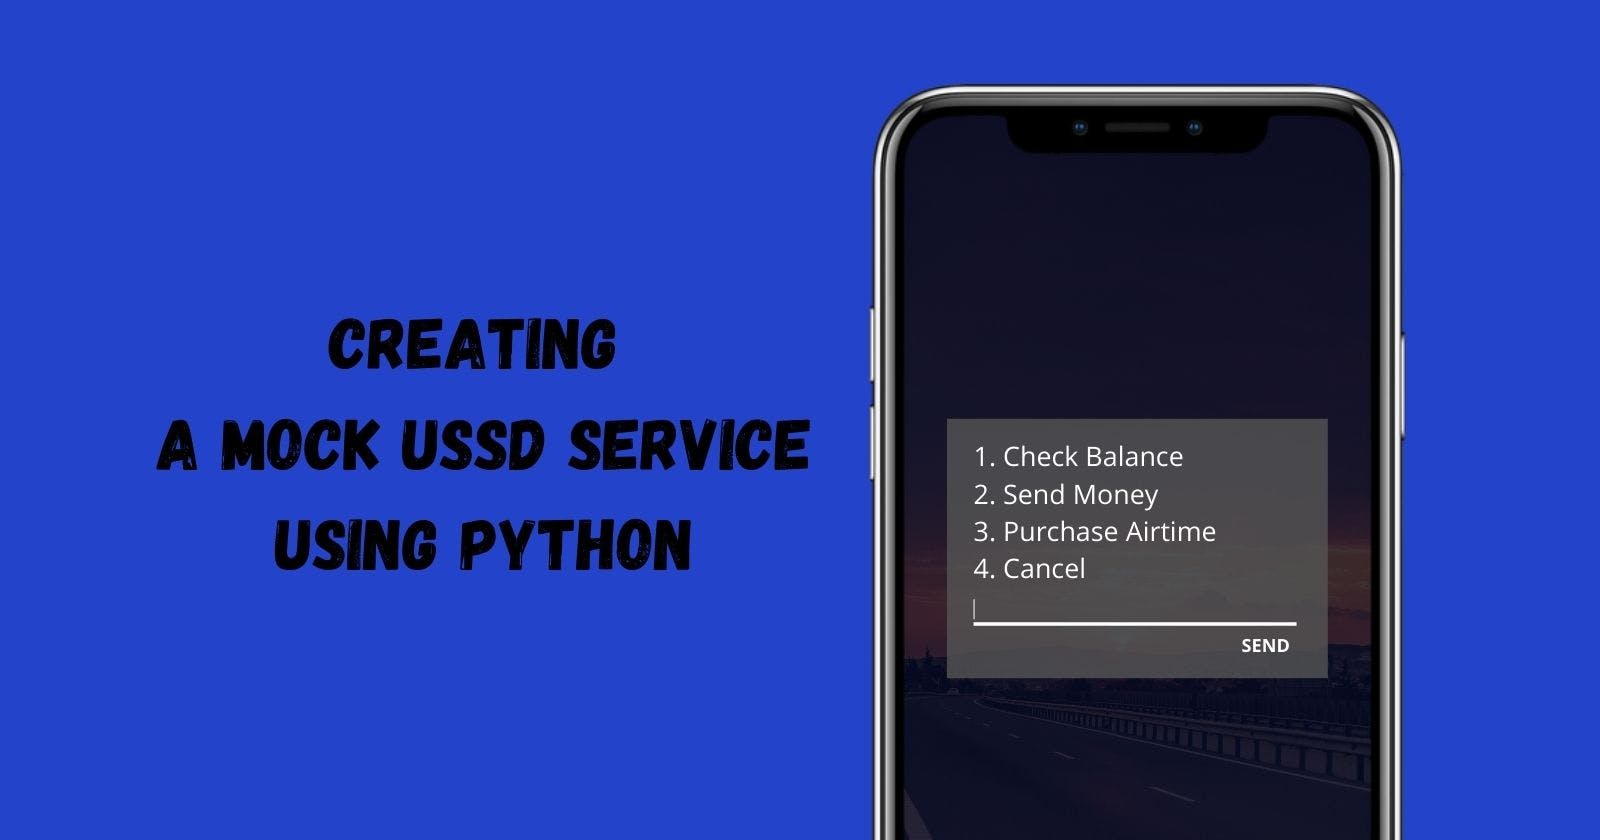 Creating a Mock USSD Service Using Python